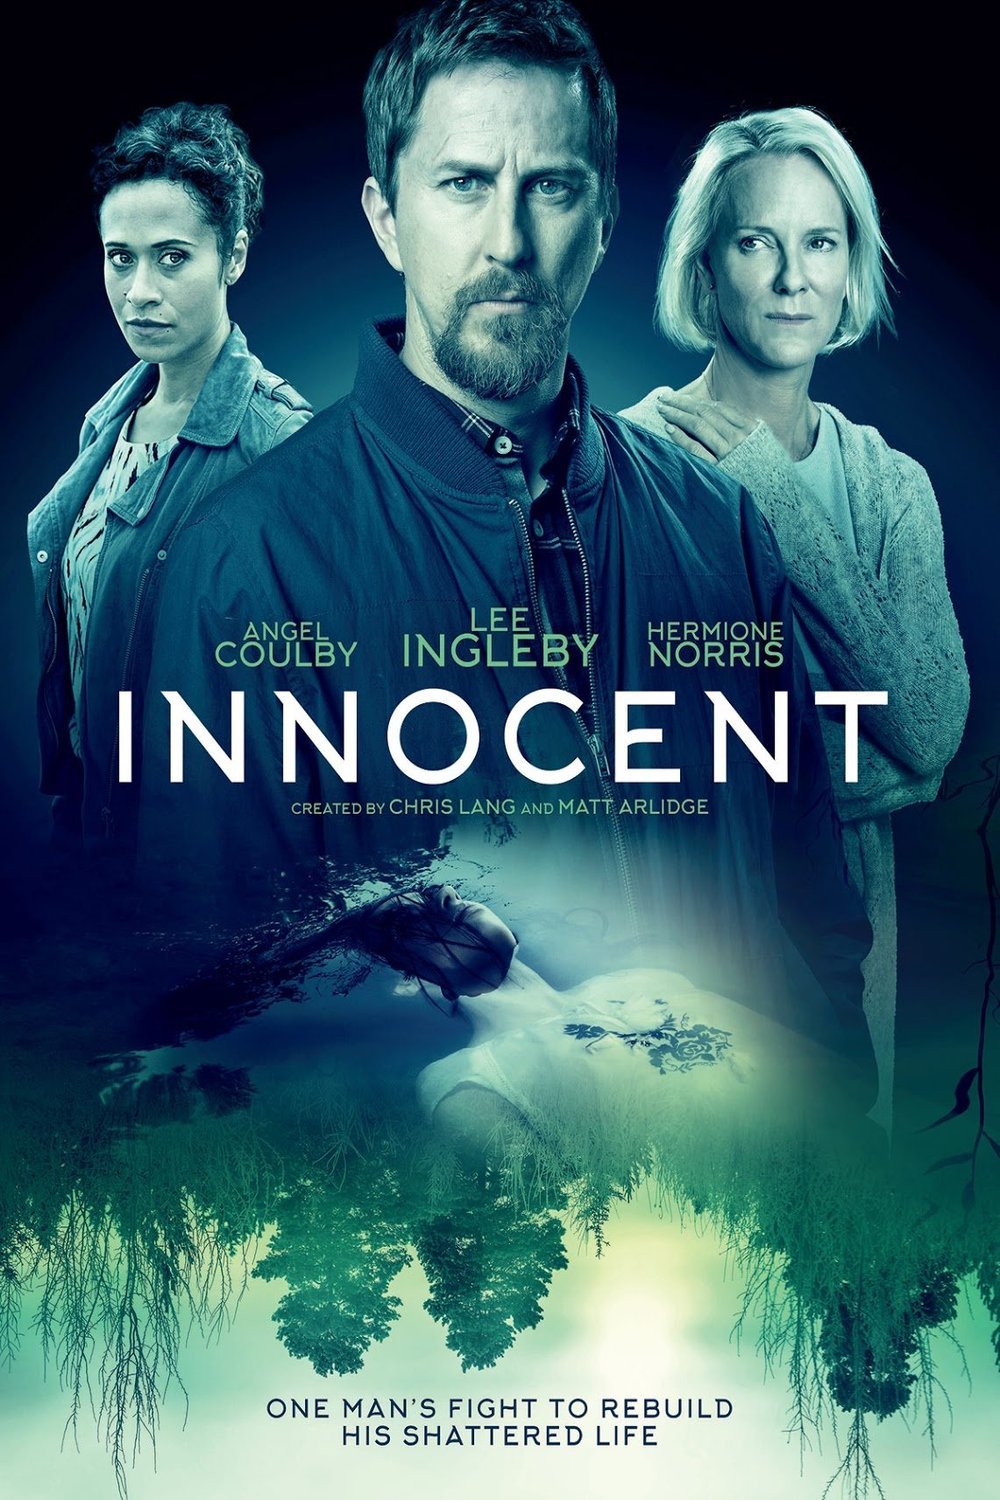 Poster of the movie Innocent